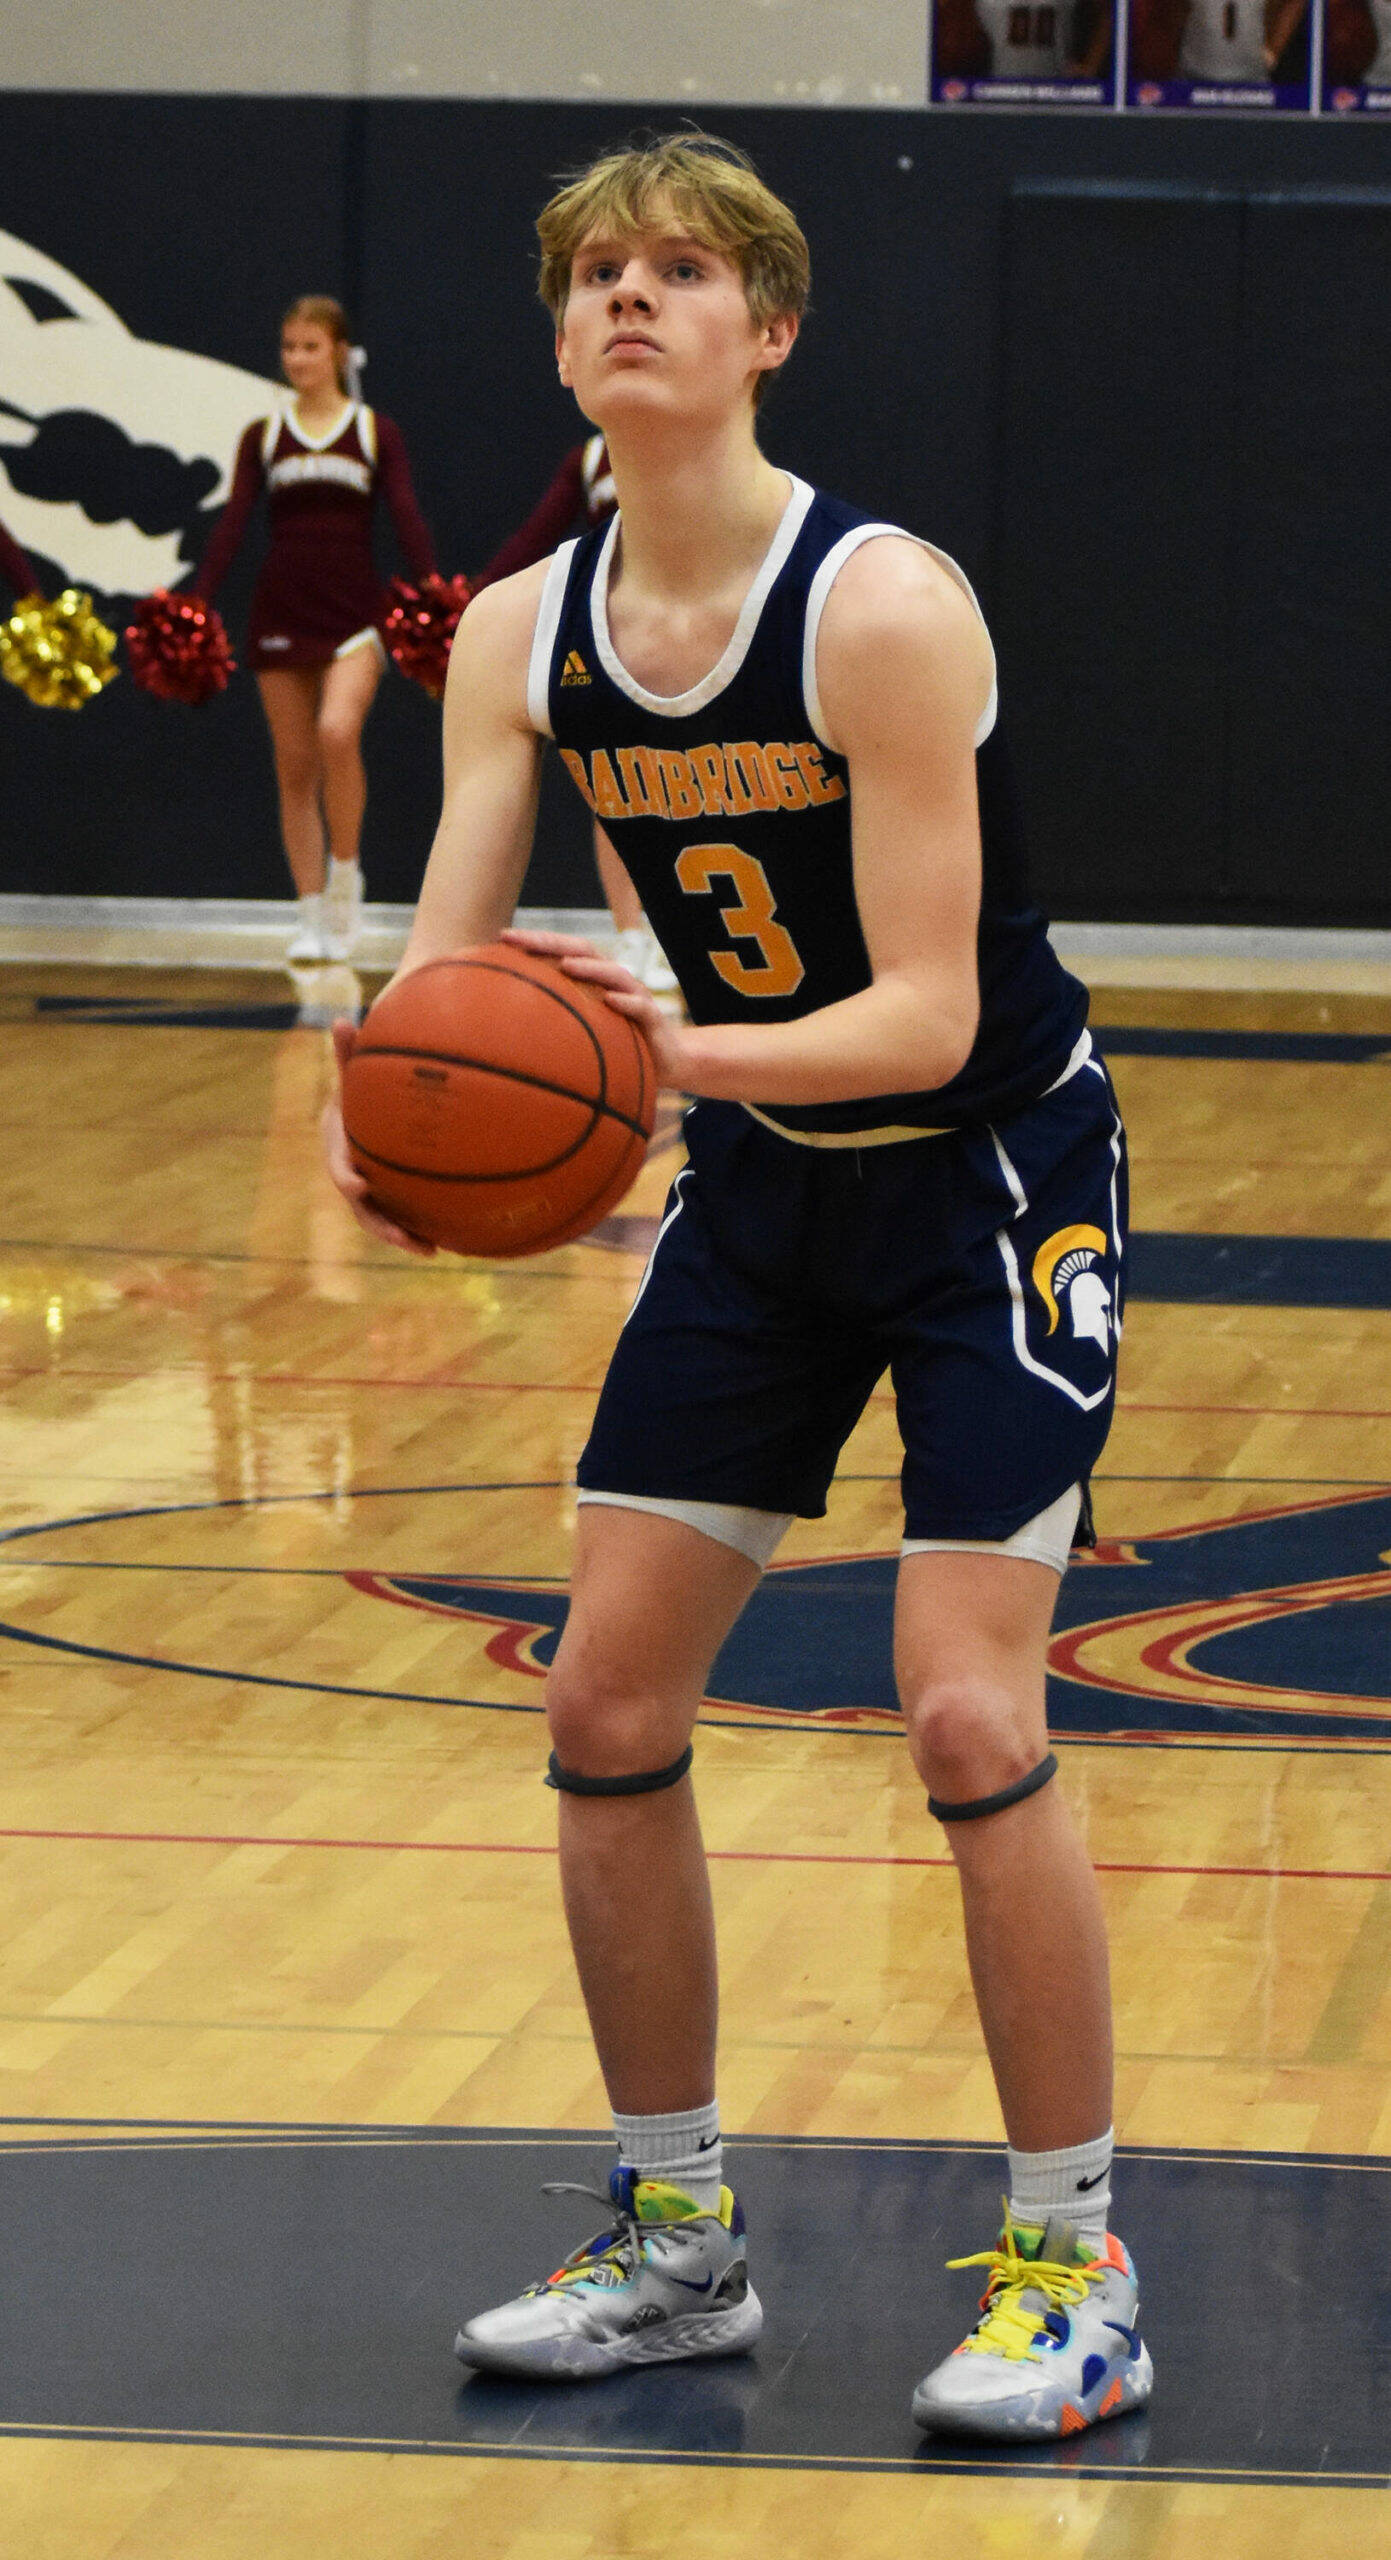 Bainbridge’s Sam Nylund finishes first-team after scoring a career-high 33 points this season.